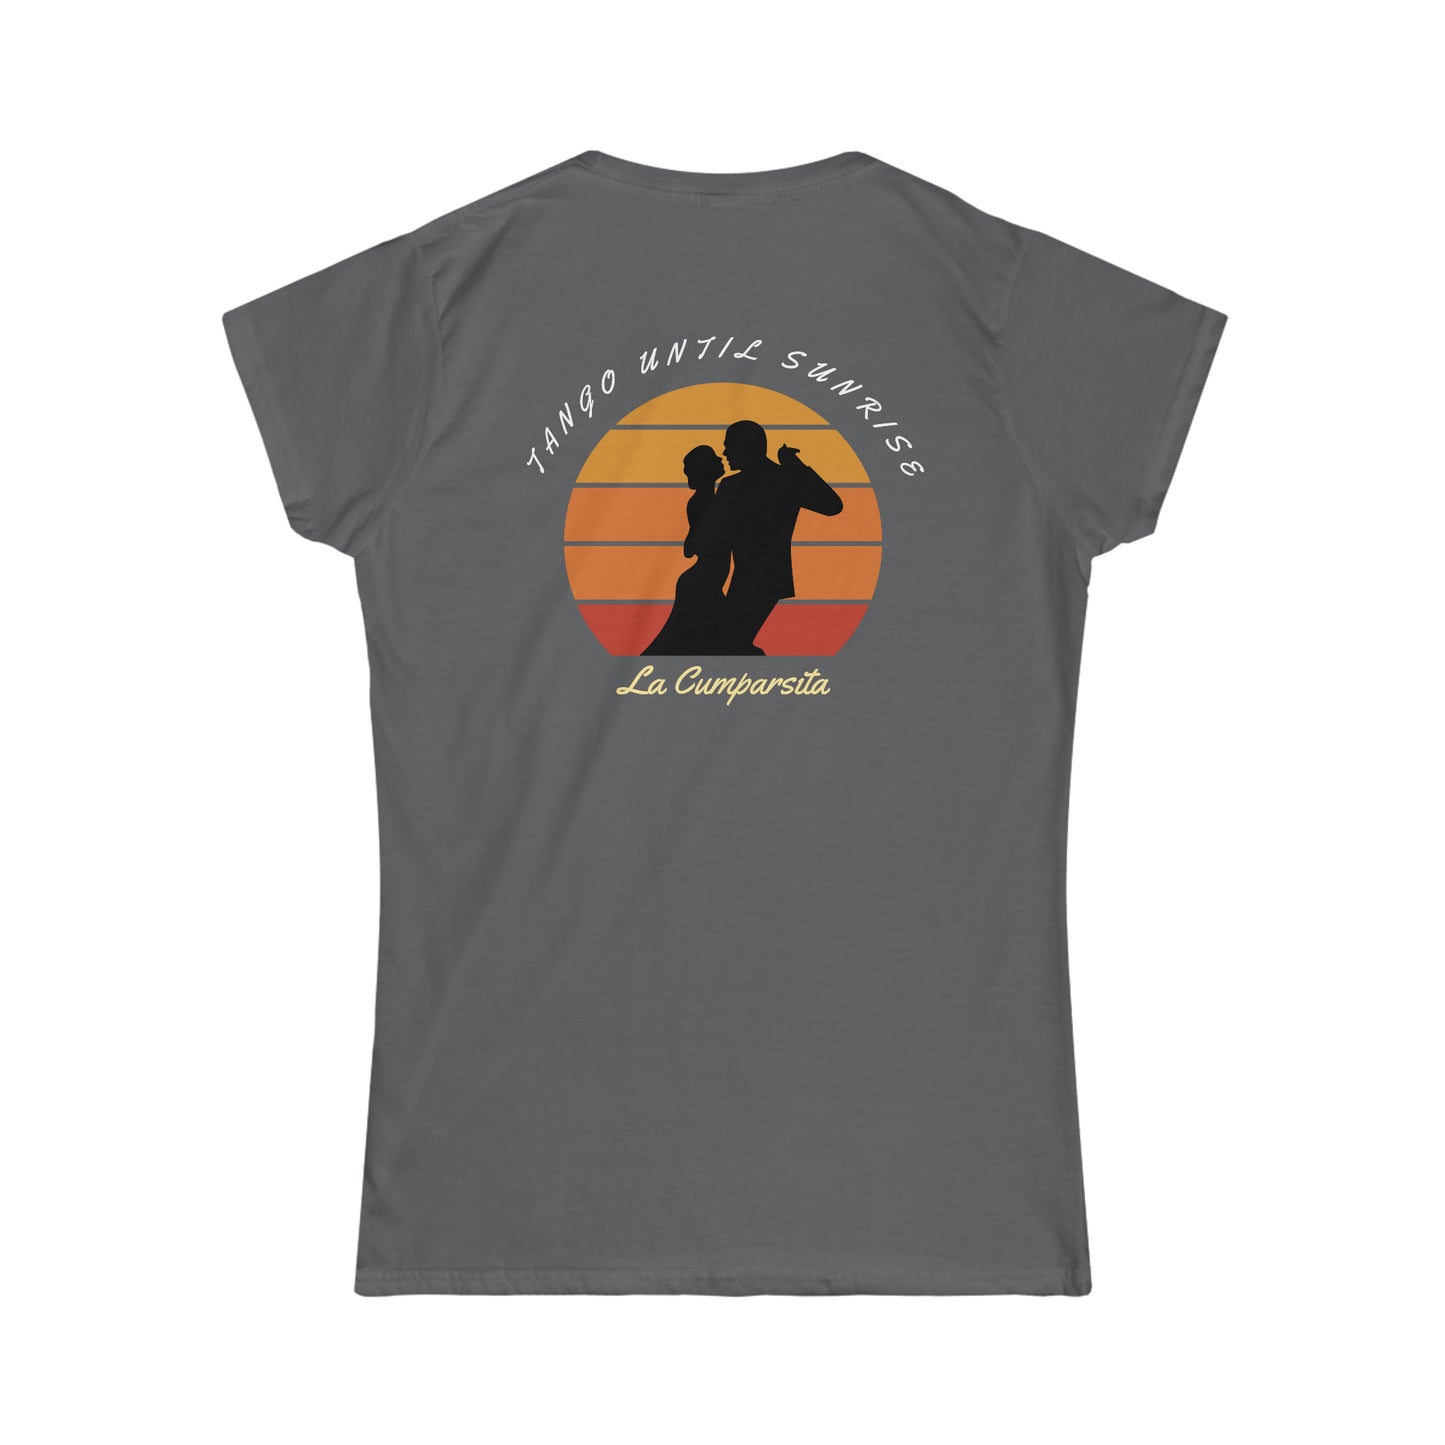 An argentine tango dance tshirt with the text "Tango until sunris. La Cumparsita" written on it and a silhouette of 2 argentine tango dancers dancing in front of the sun going down. A funny dance tshirt for tango dancers.